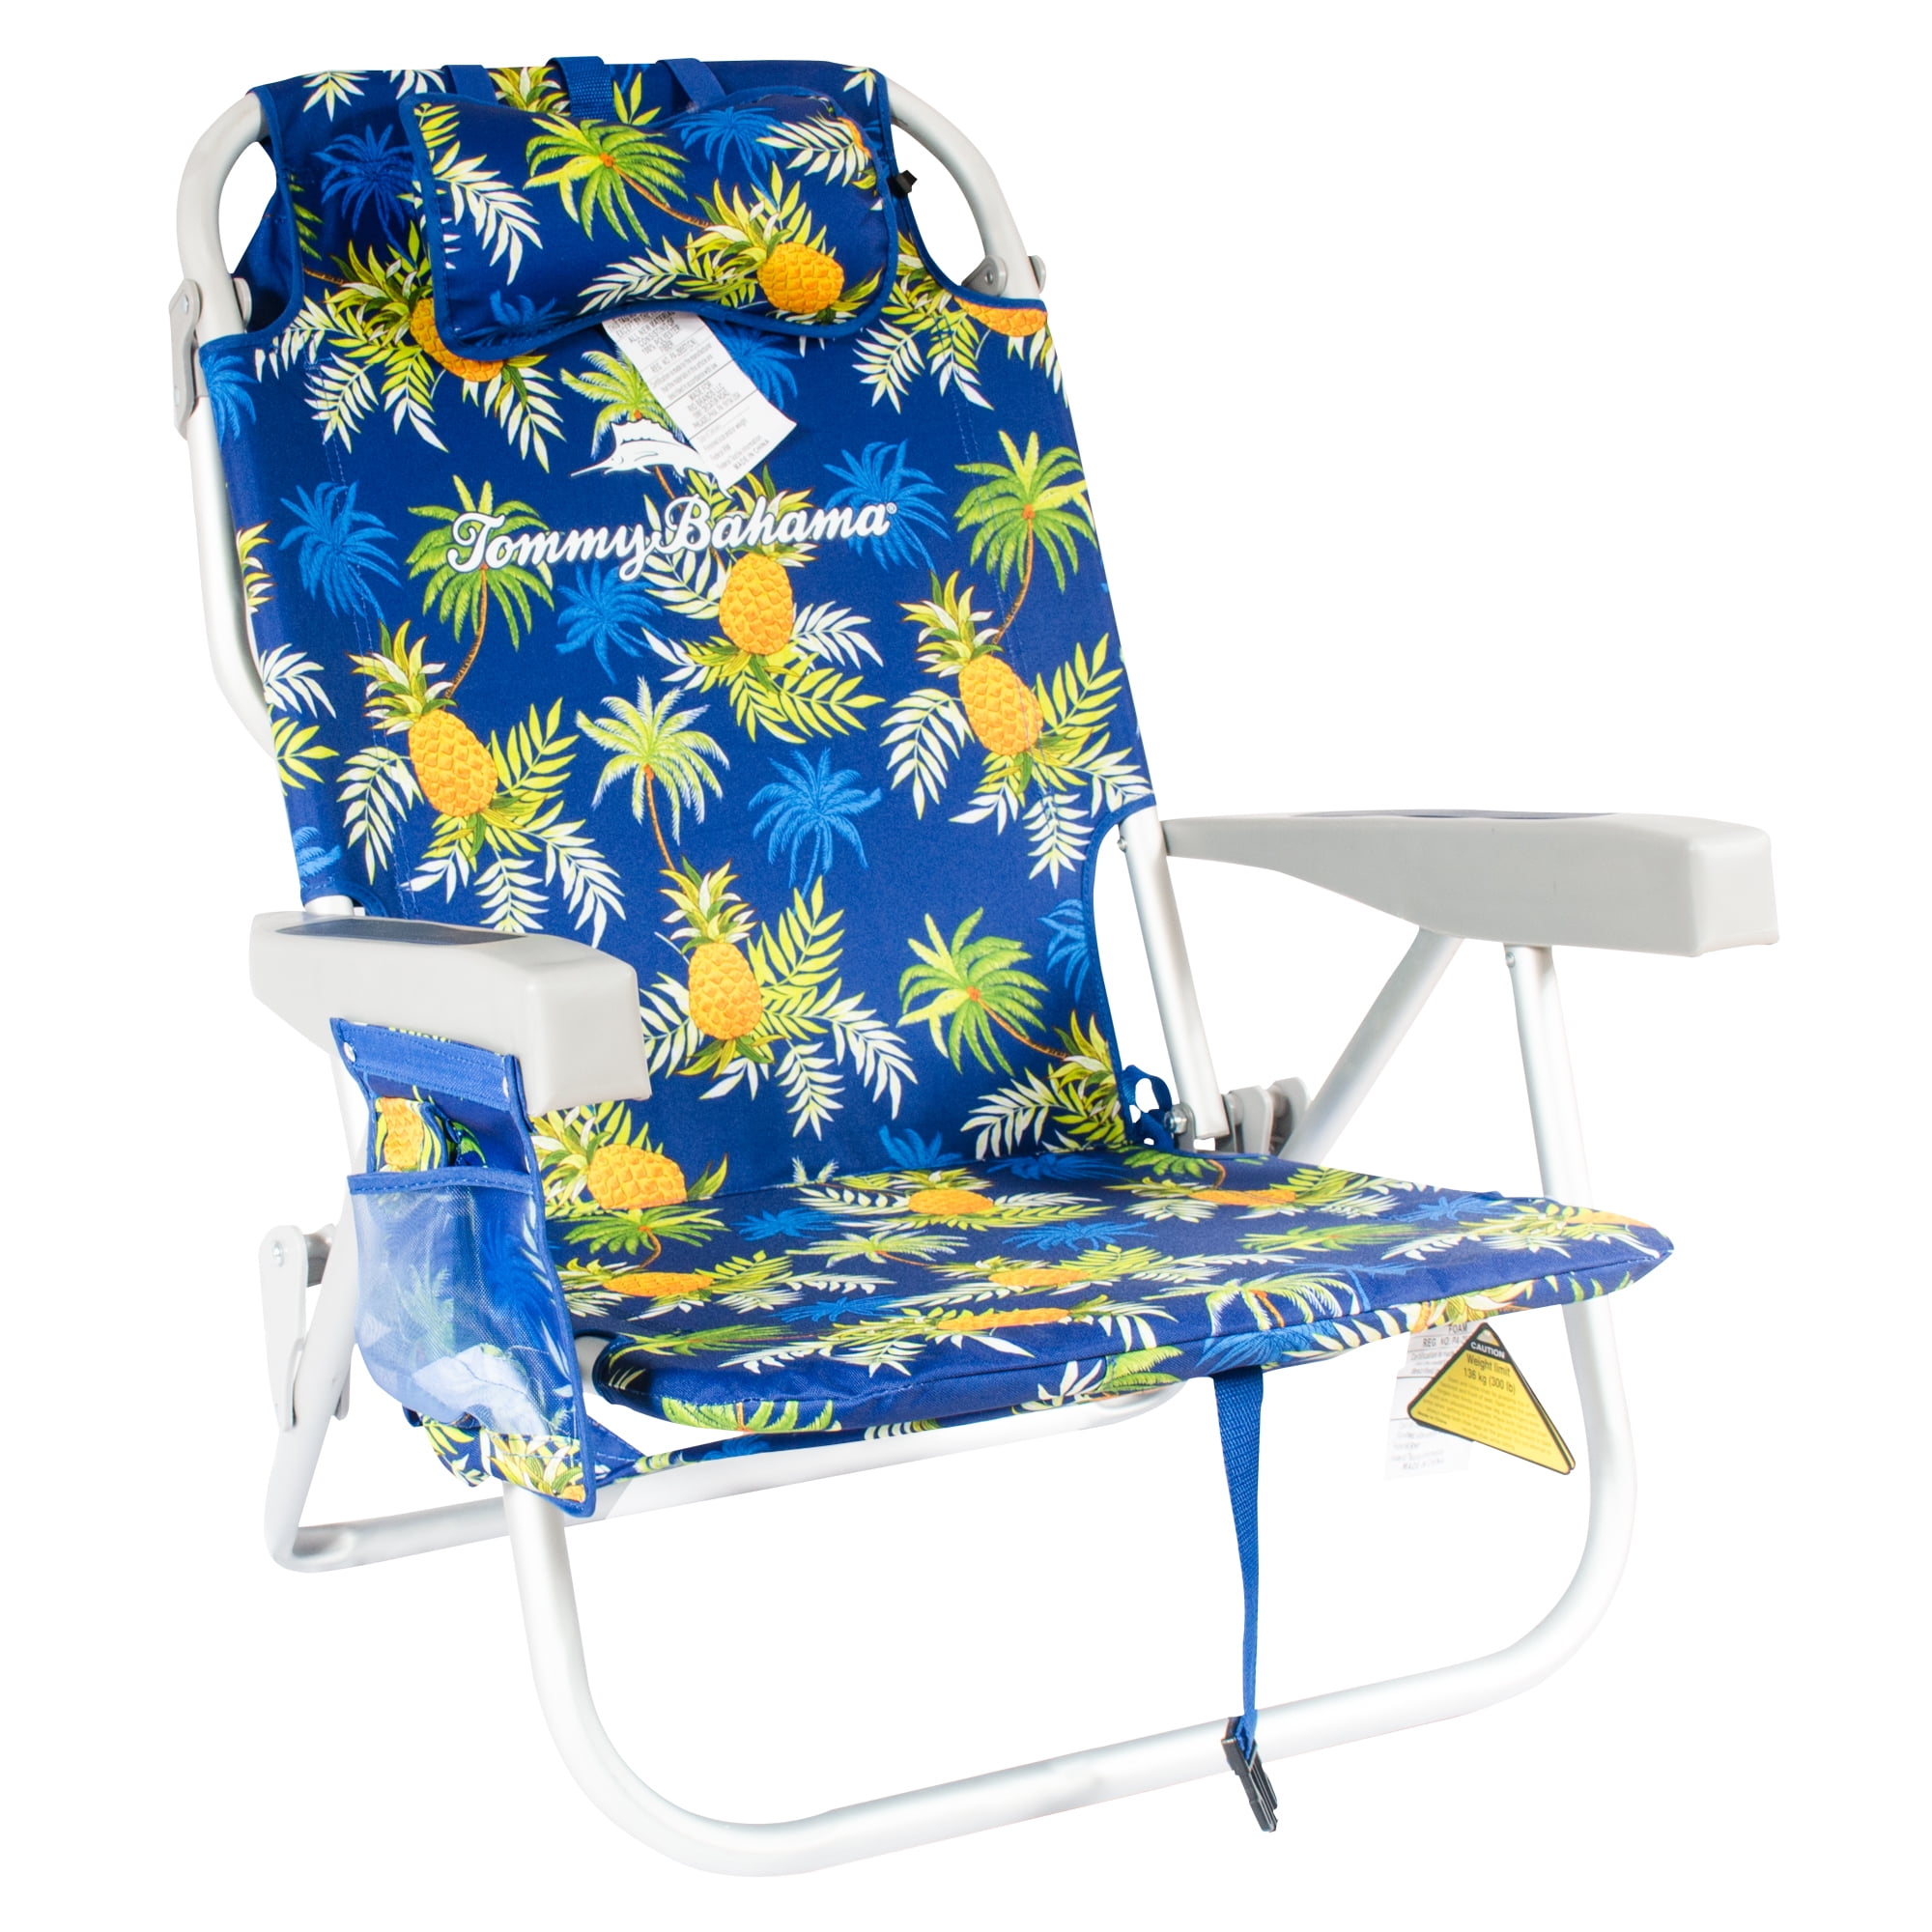 Minimalist Beach Chairs On Sale Tommy Bahama for Large Space